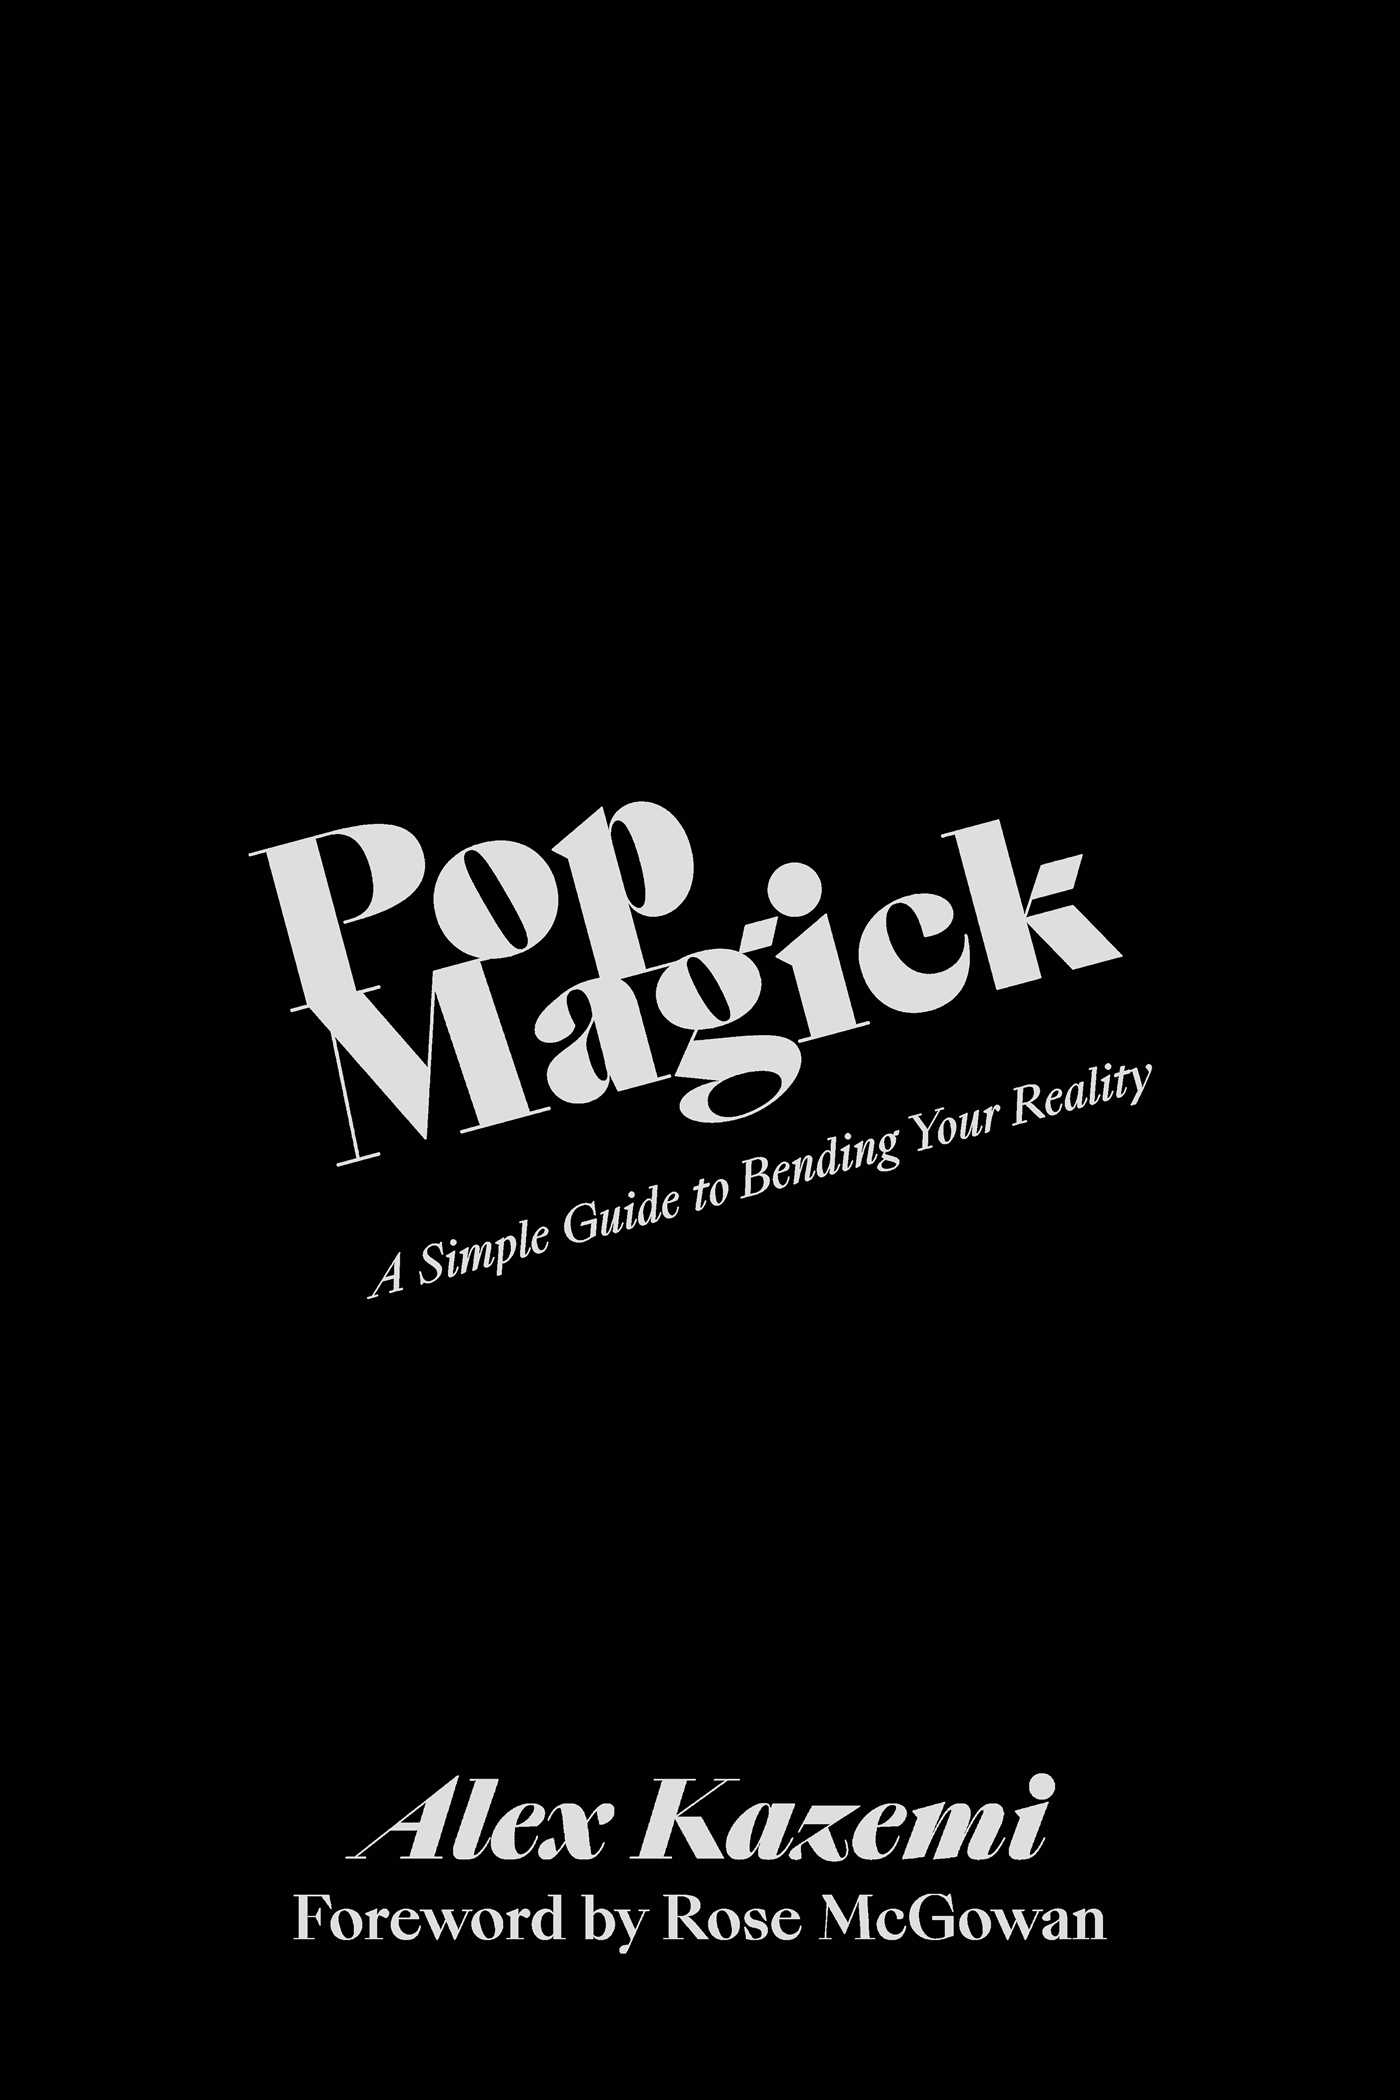 [EPUB] Pop Magick: A Simple Guide to Bending Your Reality by Alex Kazemi